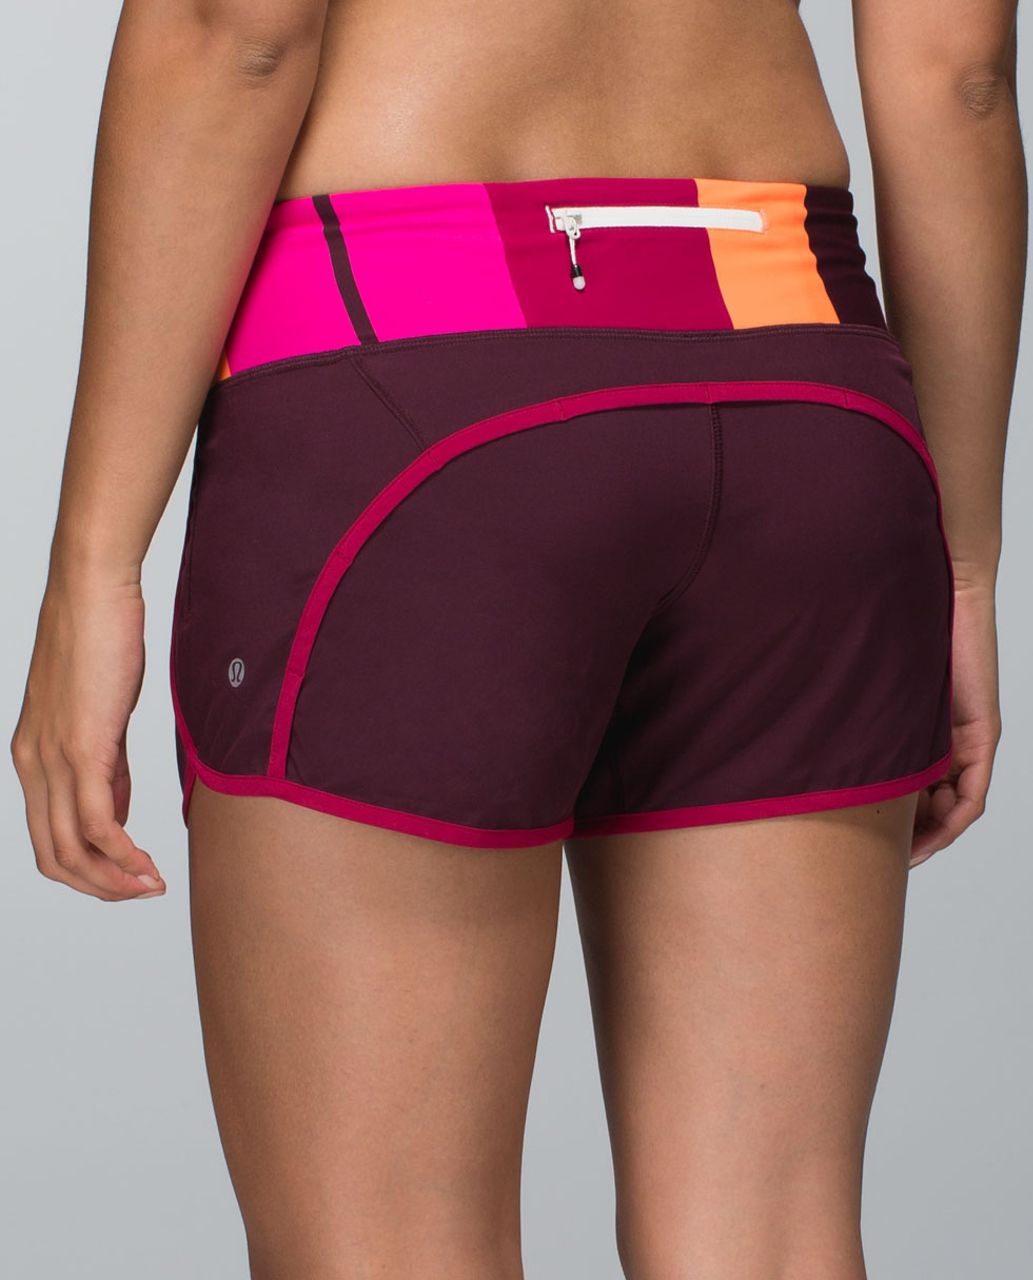 Lululemon Run Times Short *4-way Stretch - Bordeaux Drama / Bumble Berry / Blossom Stripe Bumble Berry Ghost